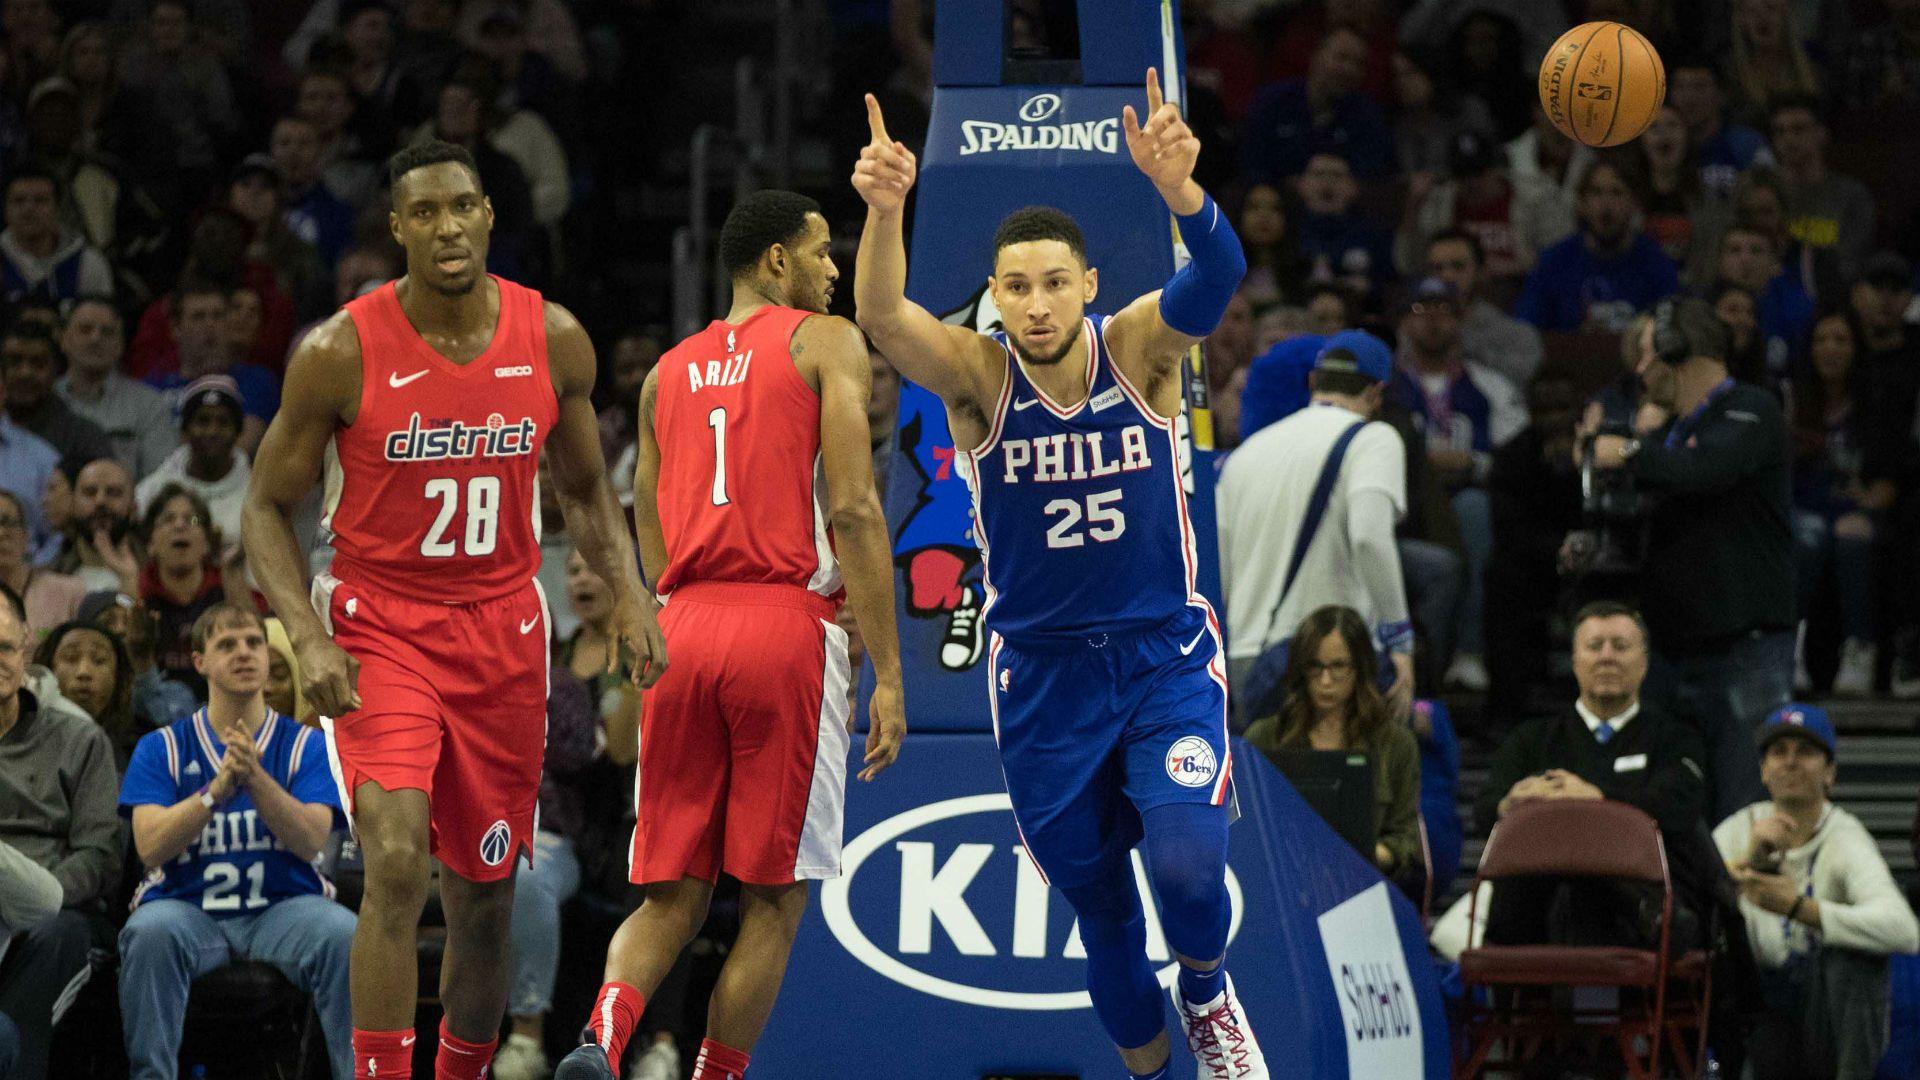 The Sixers beat the Wizards by but it was nowhere near that